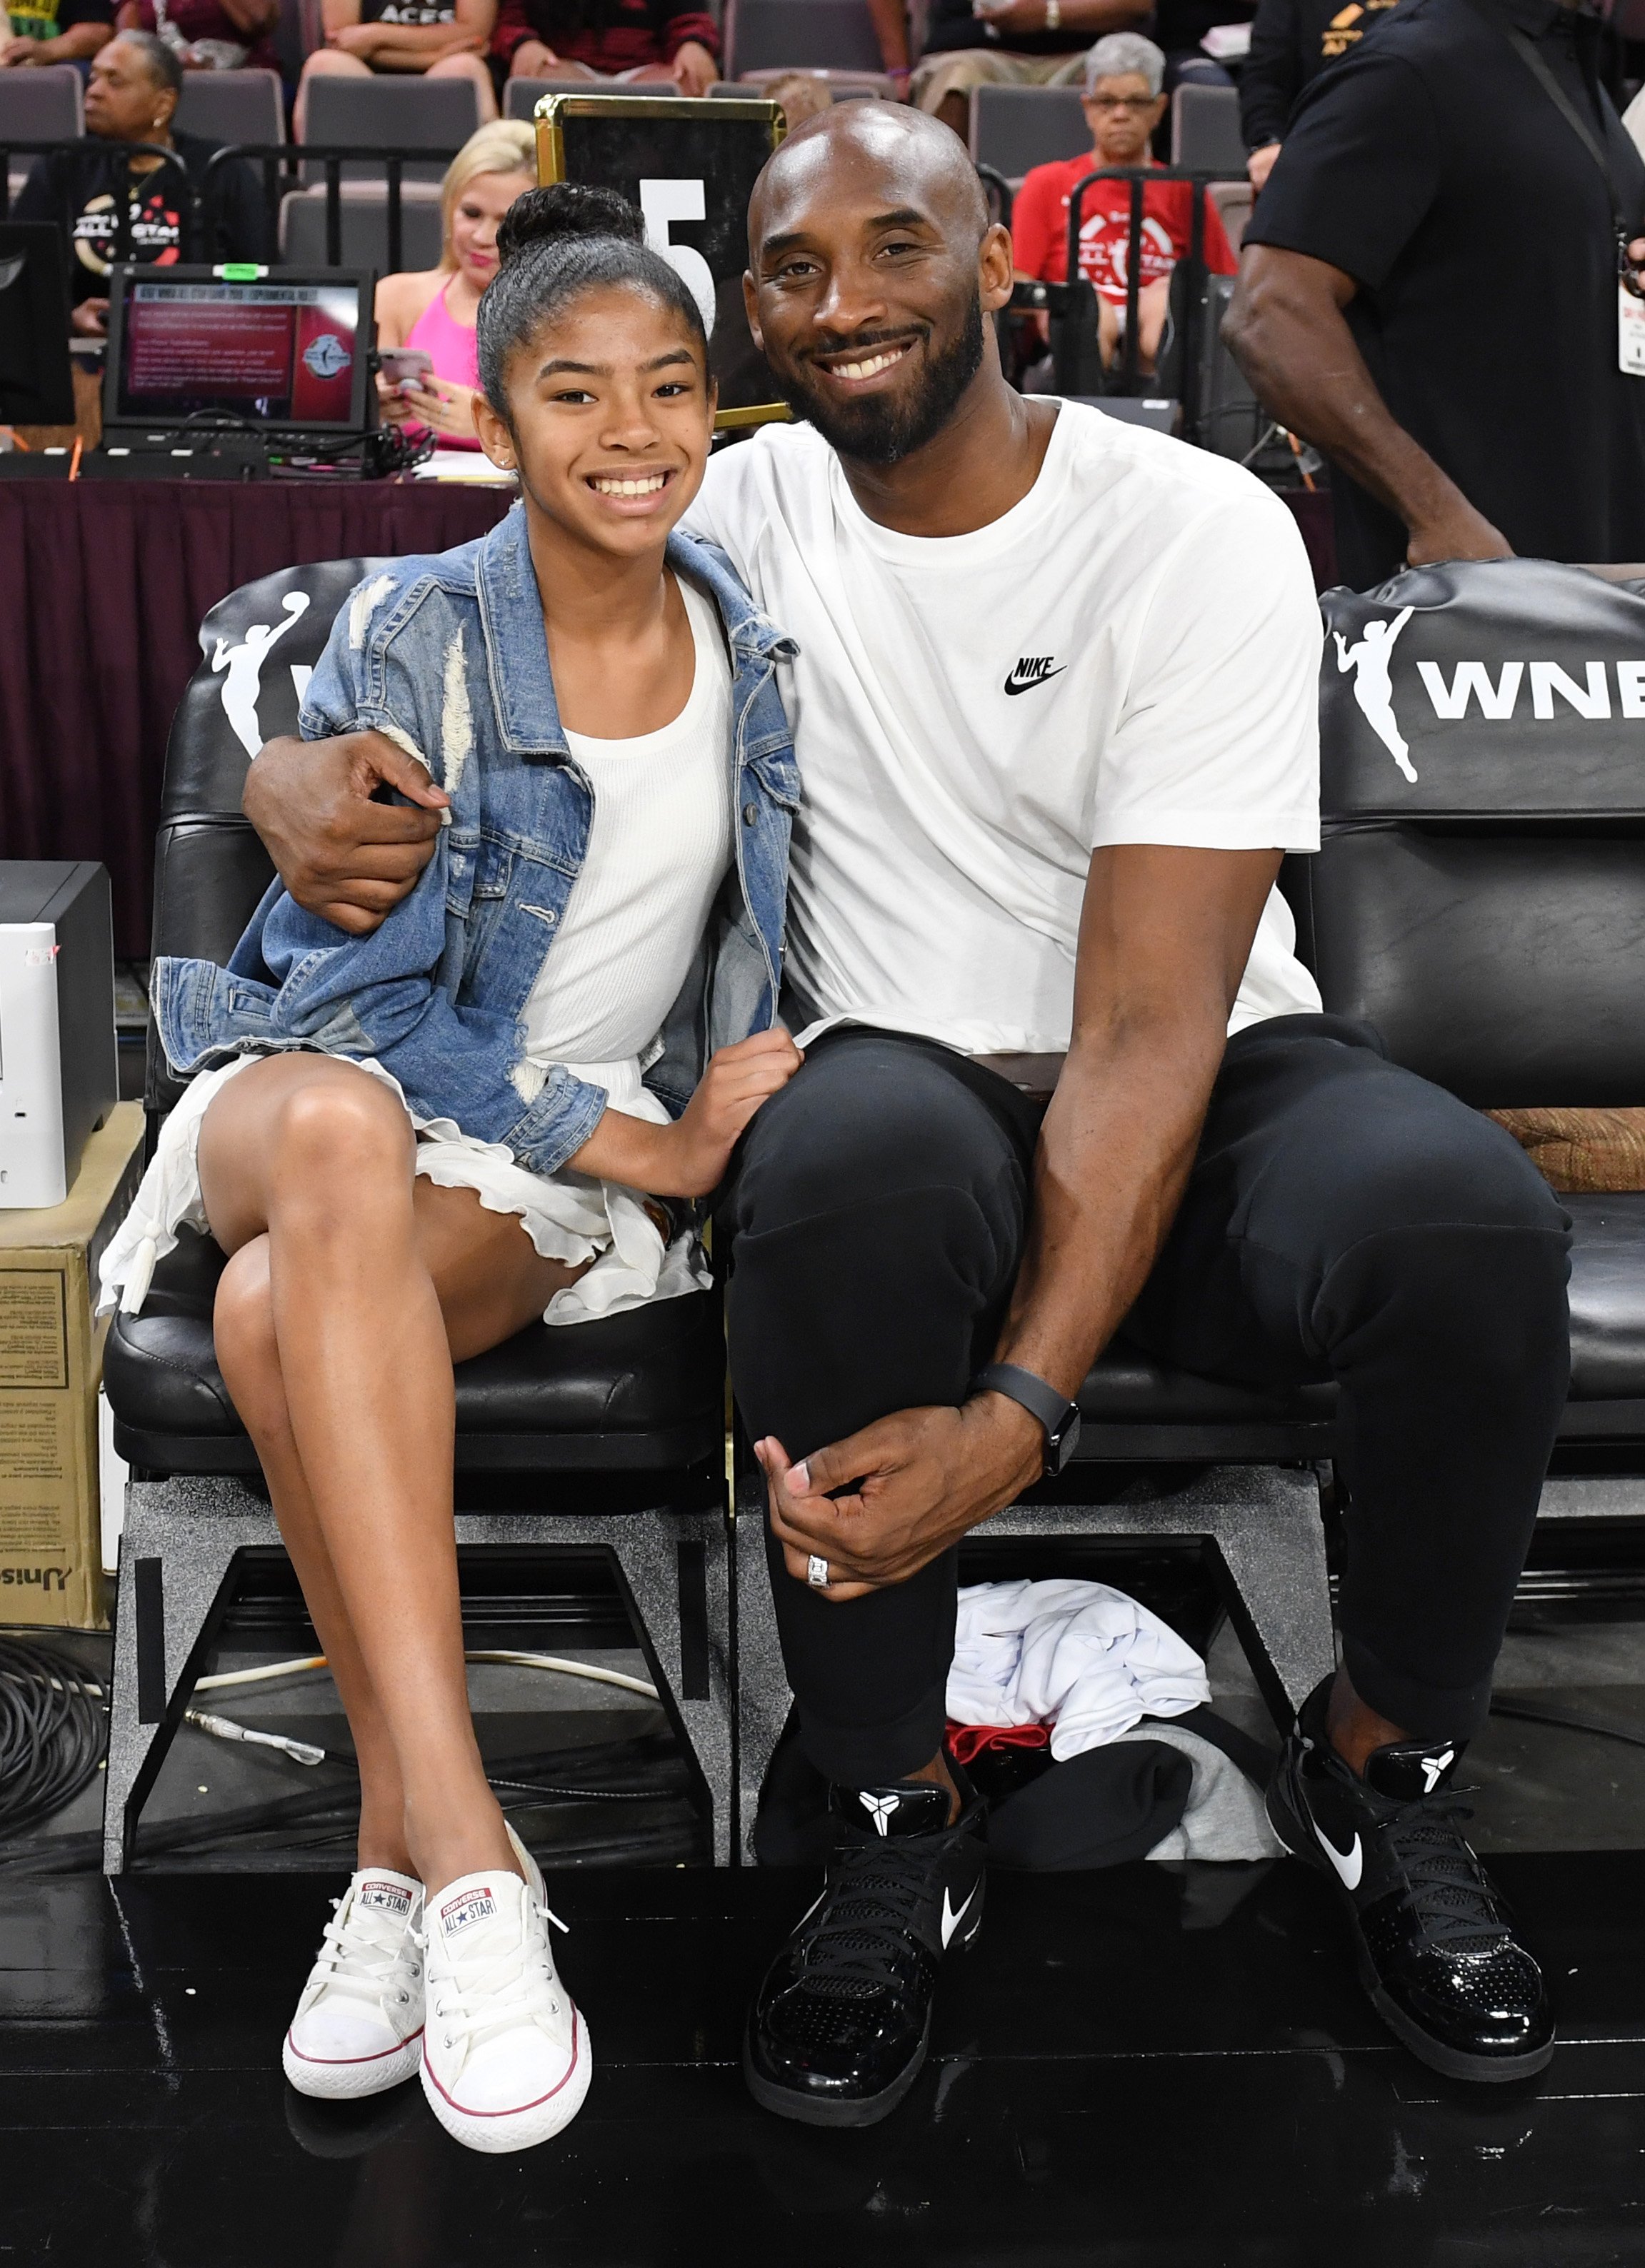 Gianna Bryant and her father, former NBA player Kobe Bryant, attend the WNBA All-Star Game 2019 at the Mandalay Bay Events Center on July 27, 2019|Photo: Getty Images